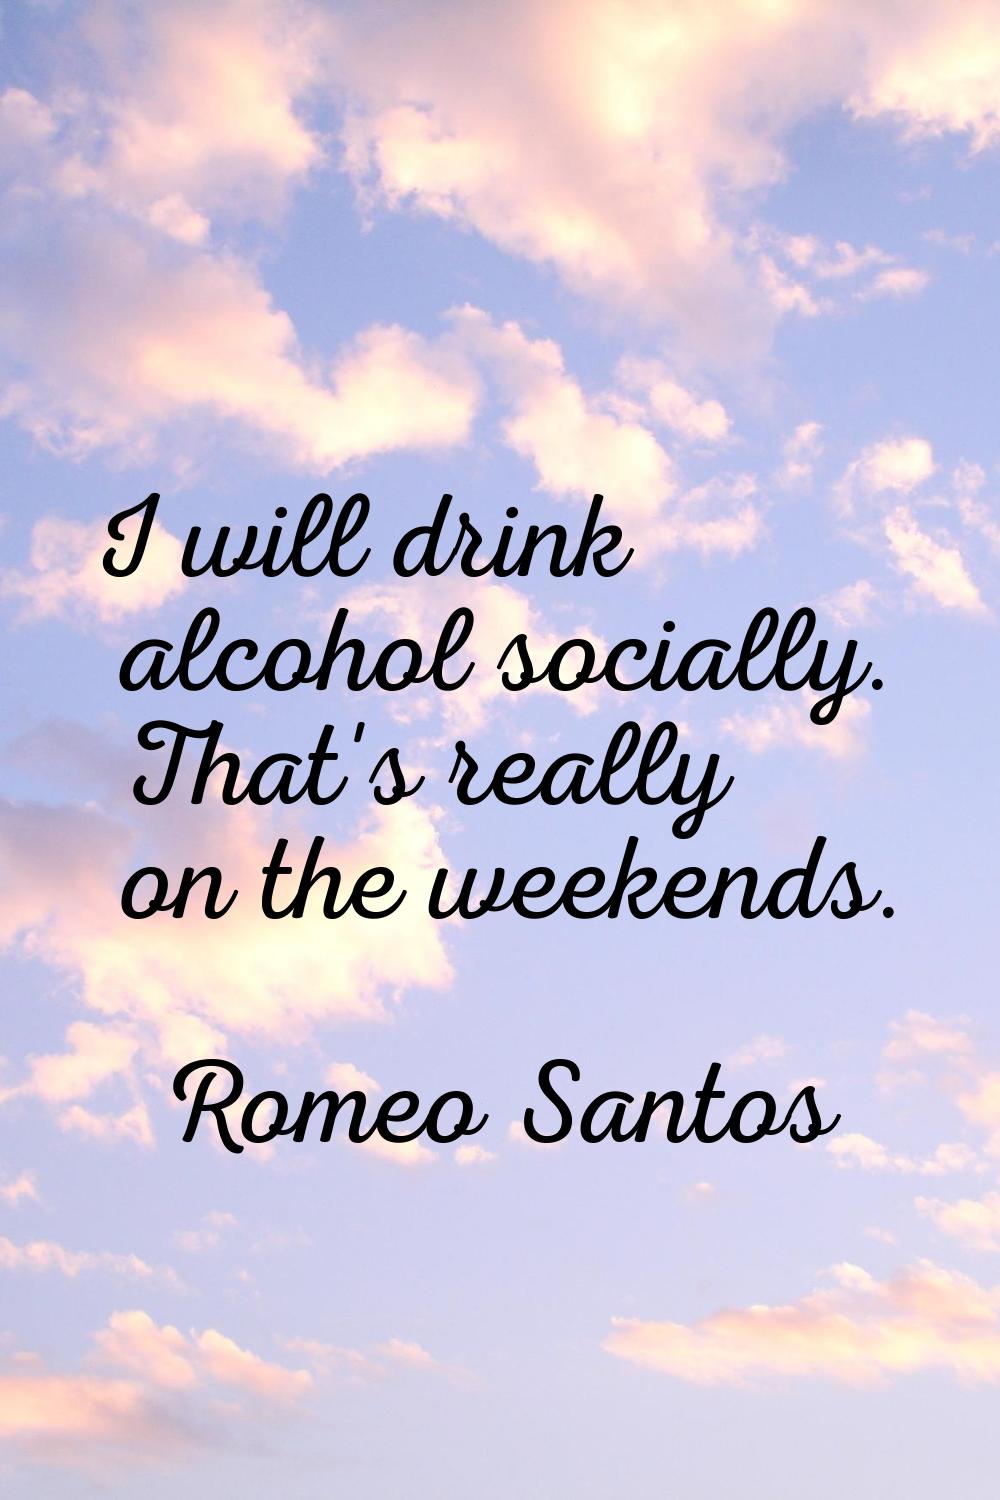 I will drink alcohol socially. That's really on the weekends.